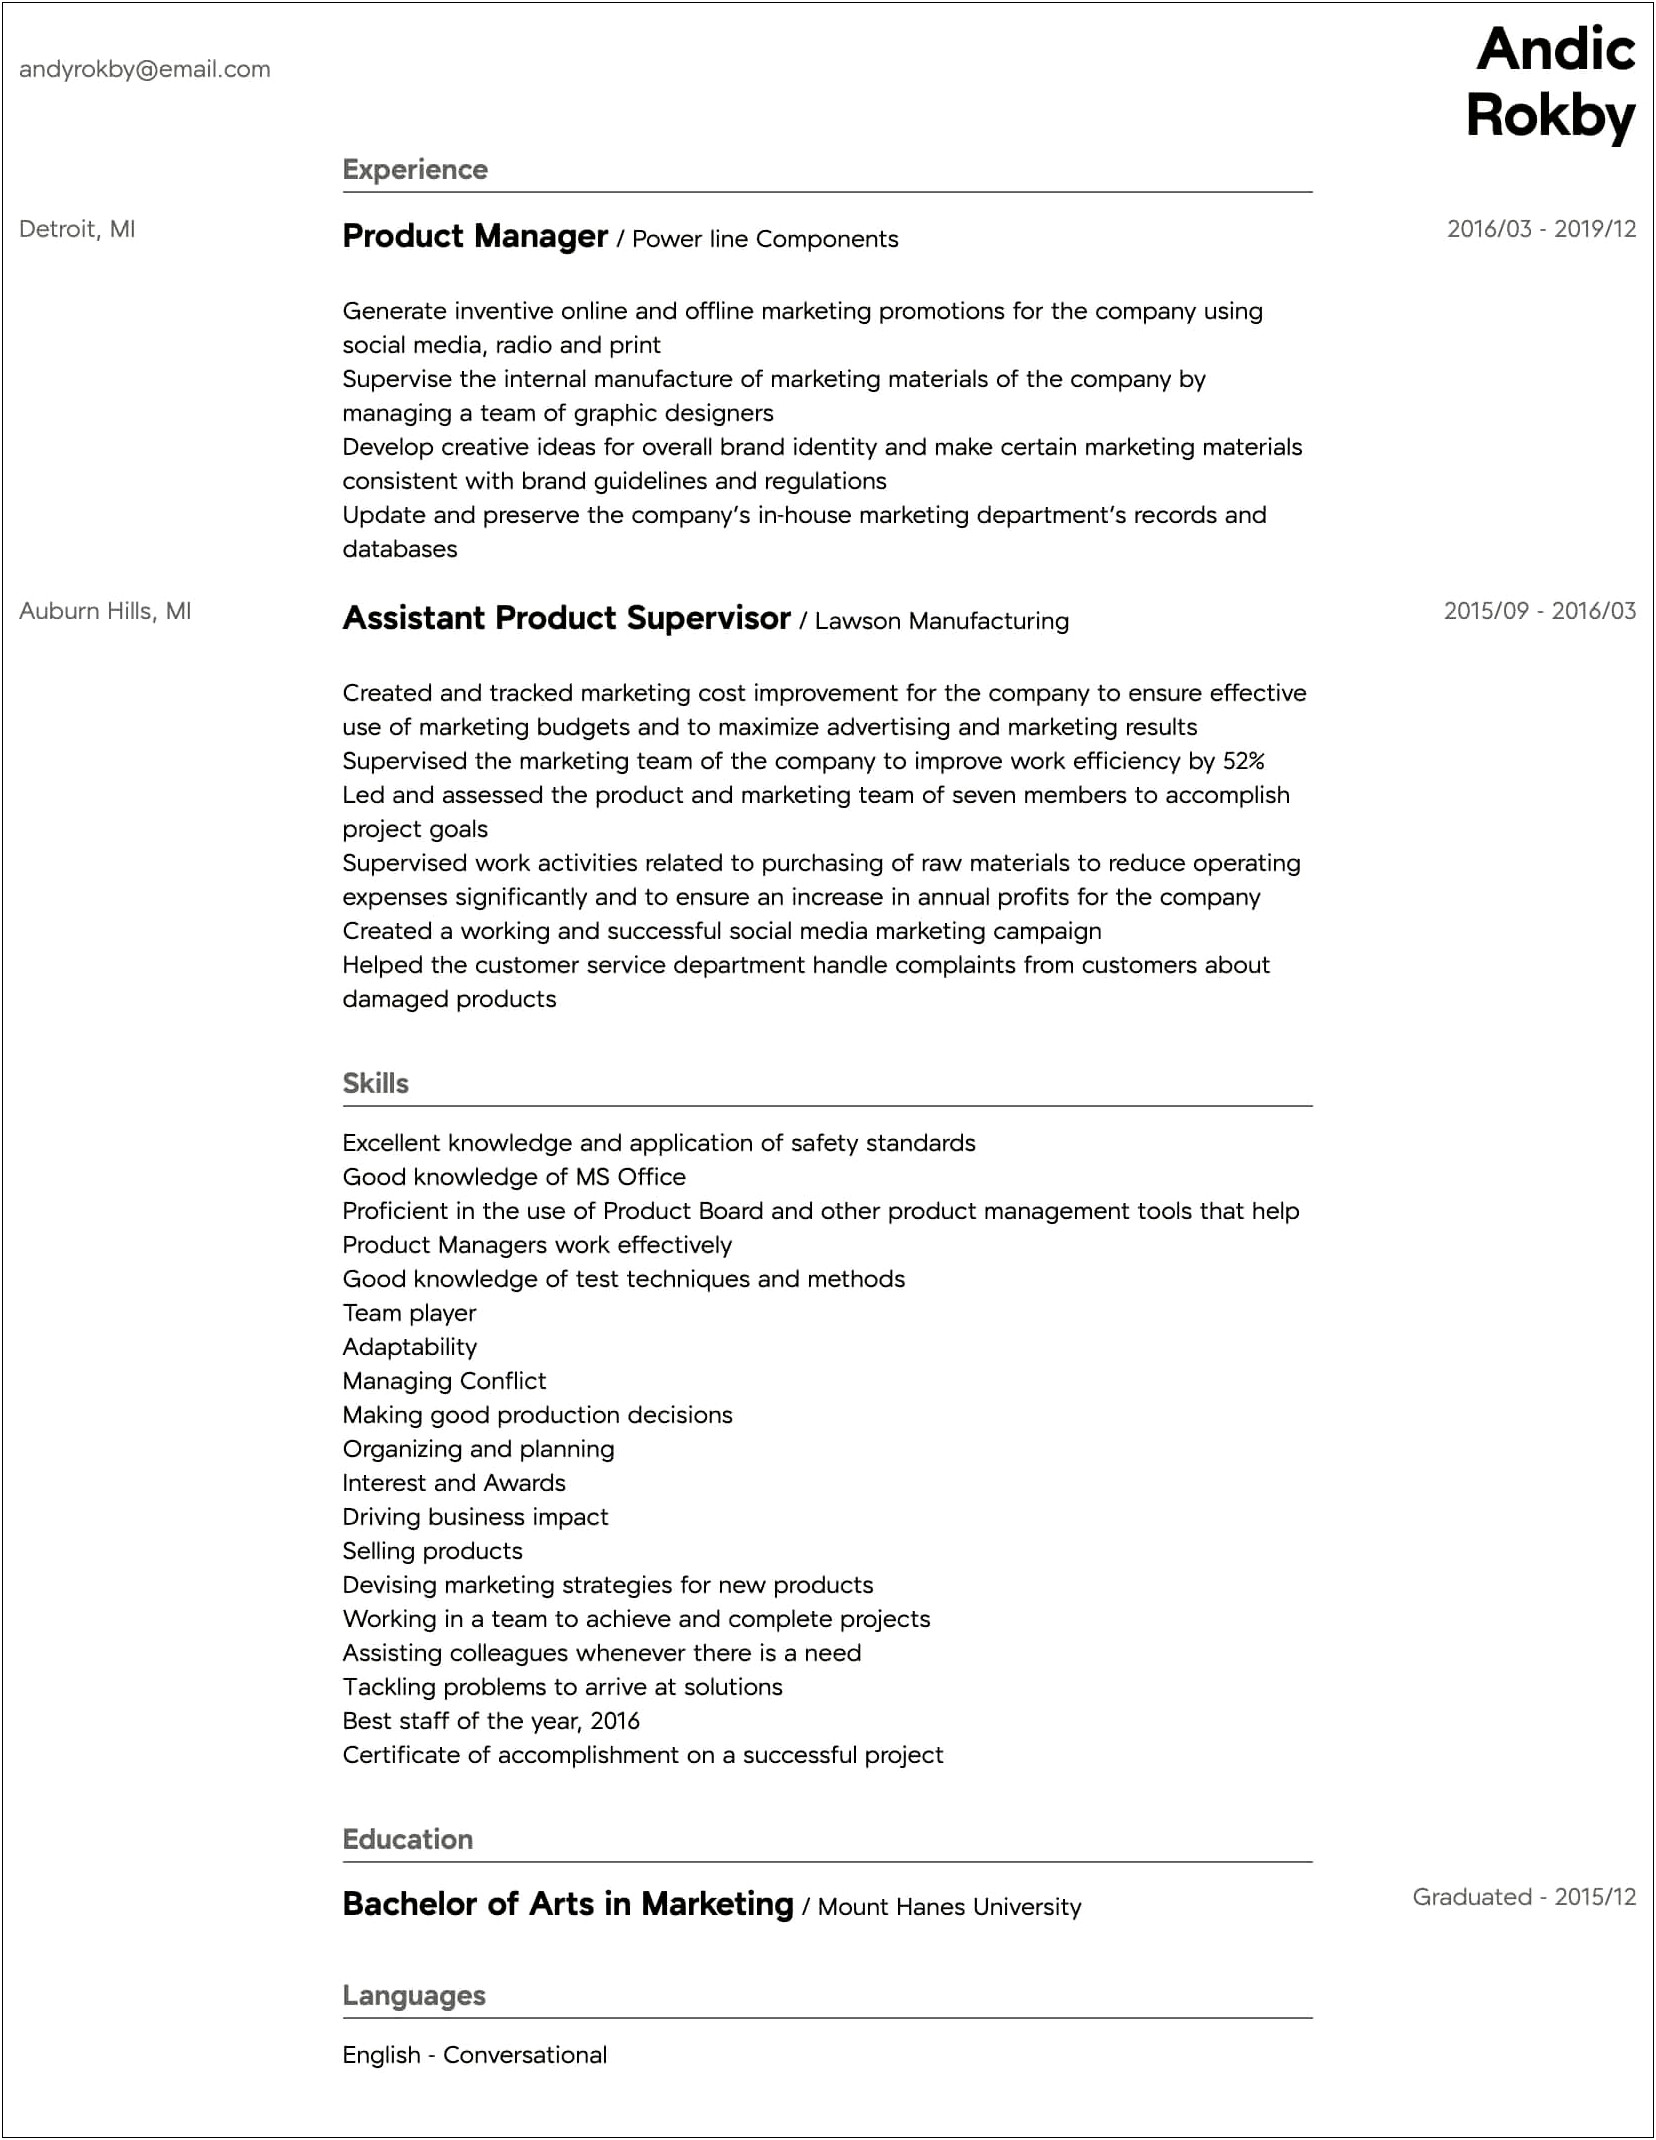 Resume Examples For Product Manager